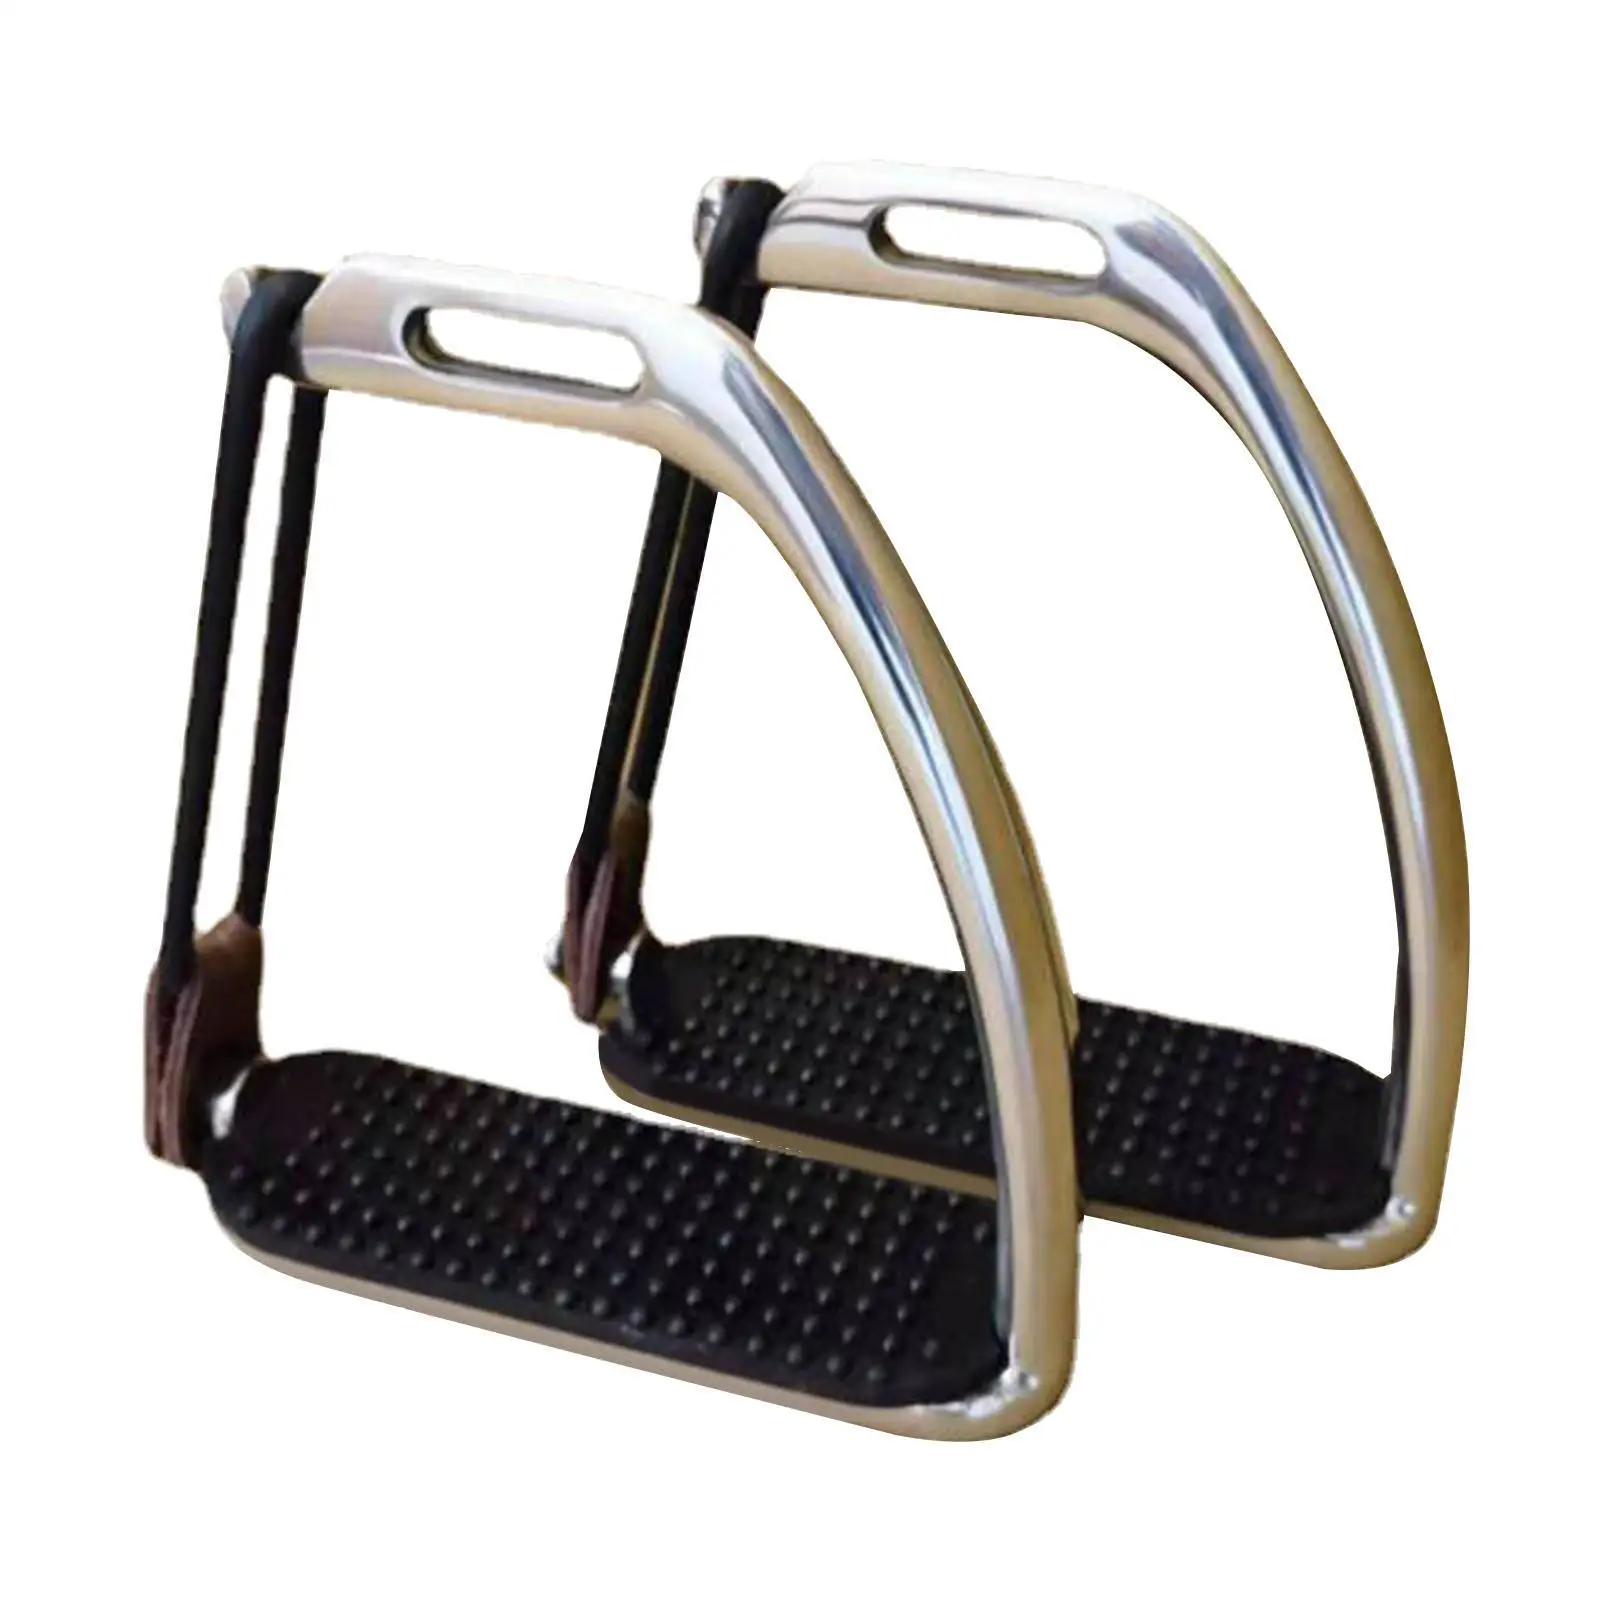 Horse Riding Stirrups Heavy Duty 2Pcs for Outdoor English Riding